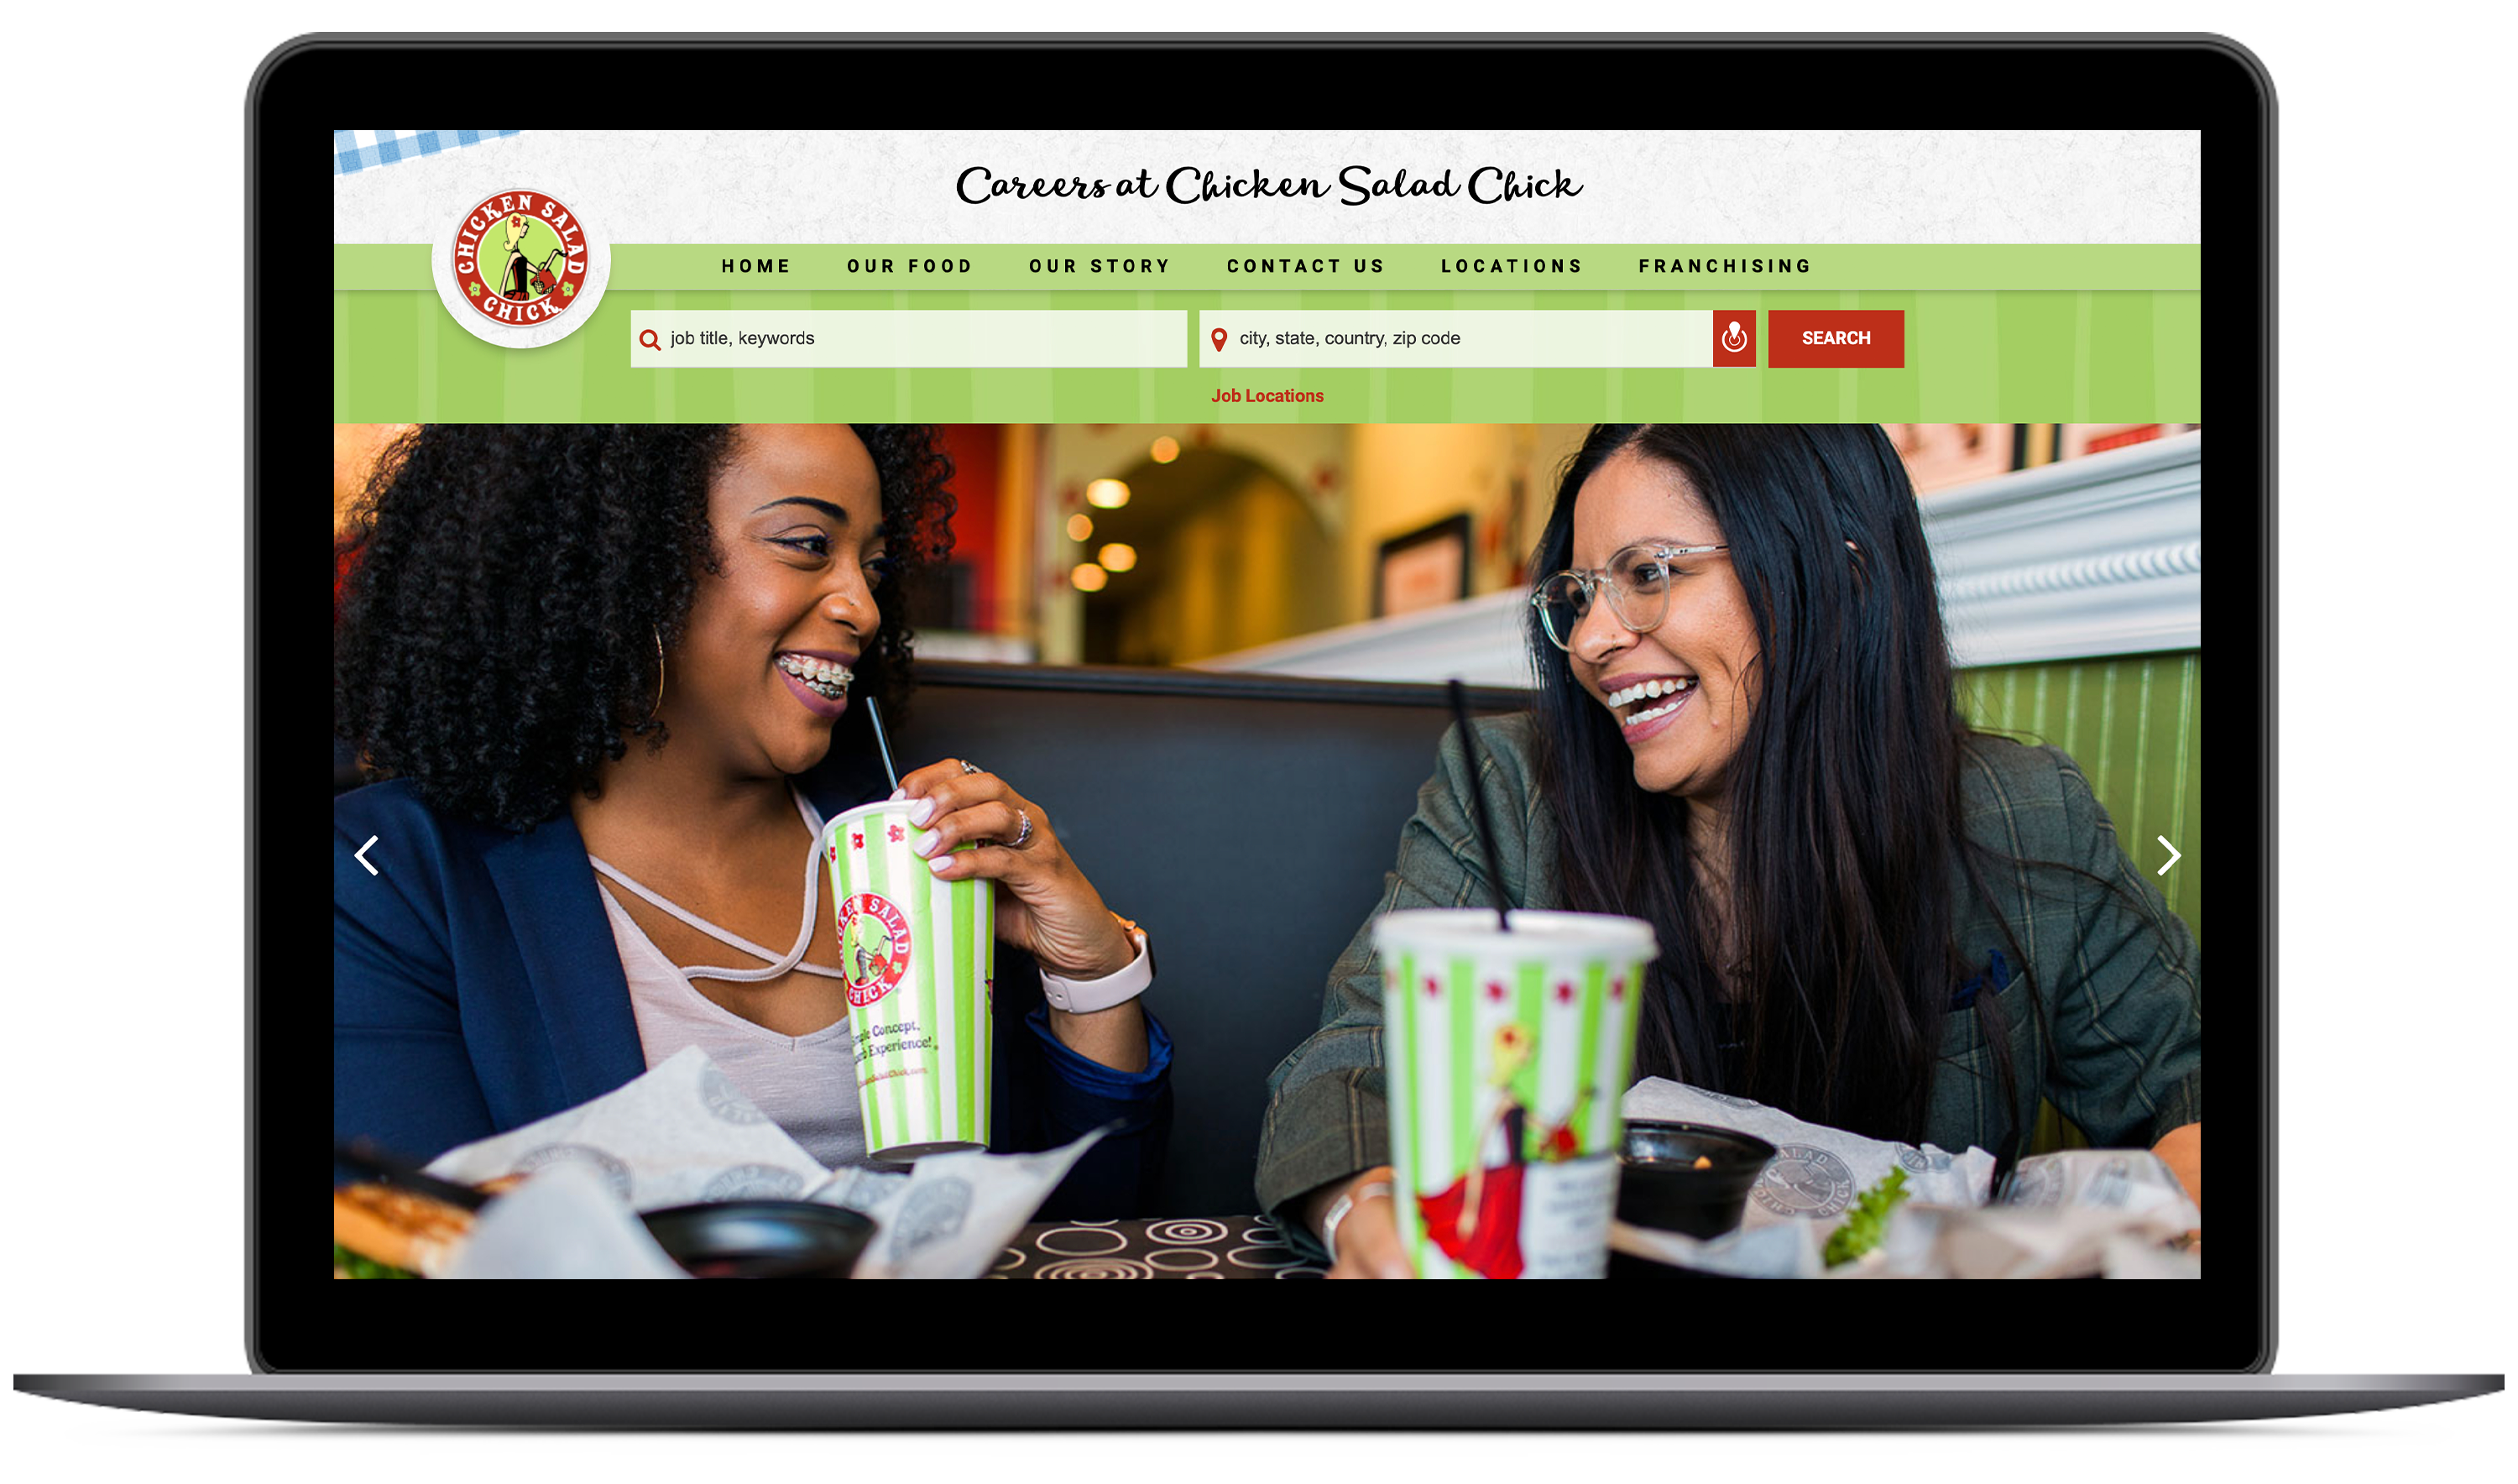 Chicken Salad Chick career site by Recruit Rooster